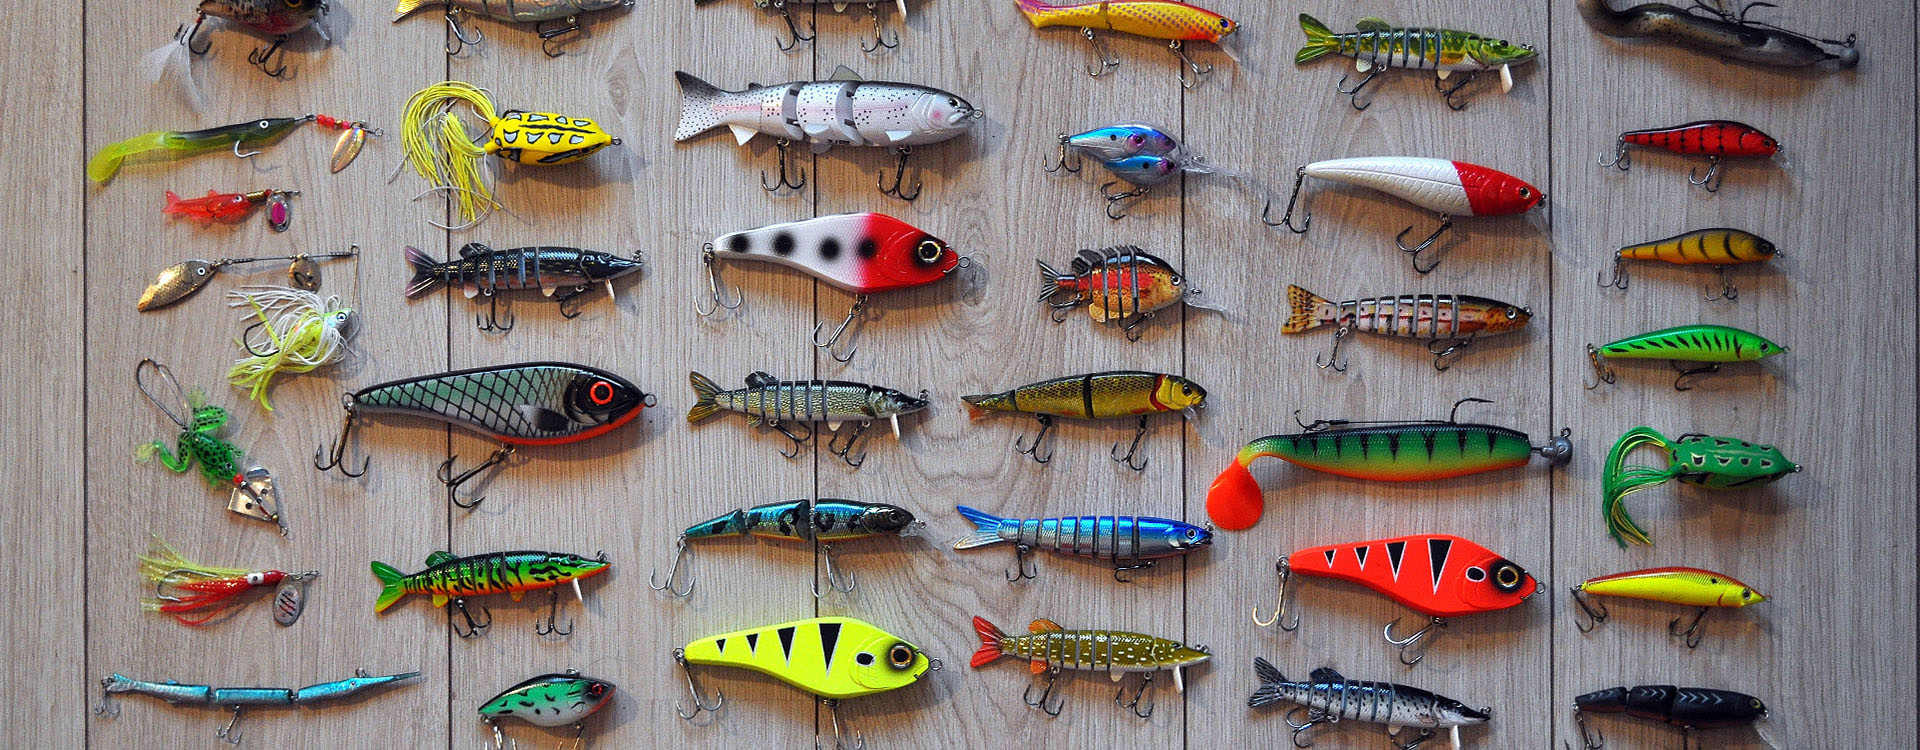 Do you put weights on bass lures? - Quora